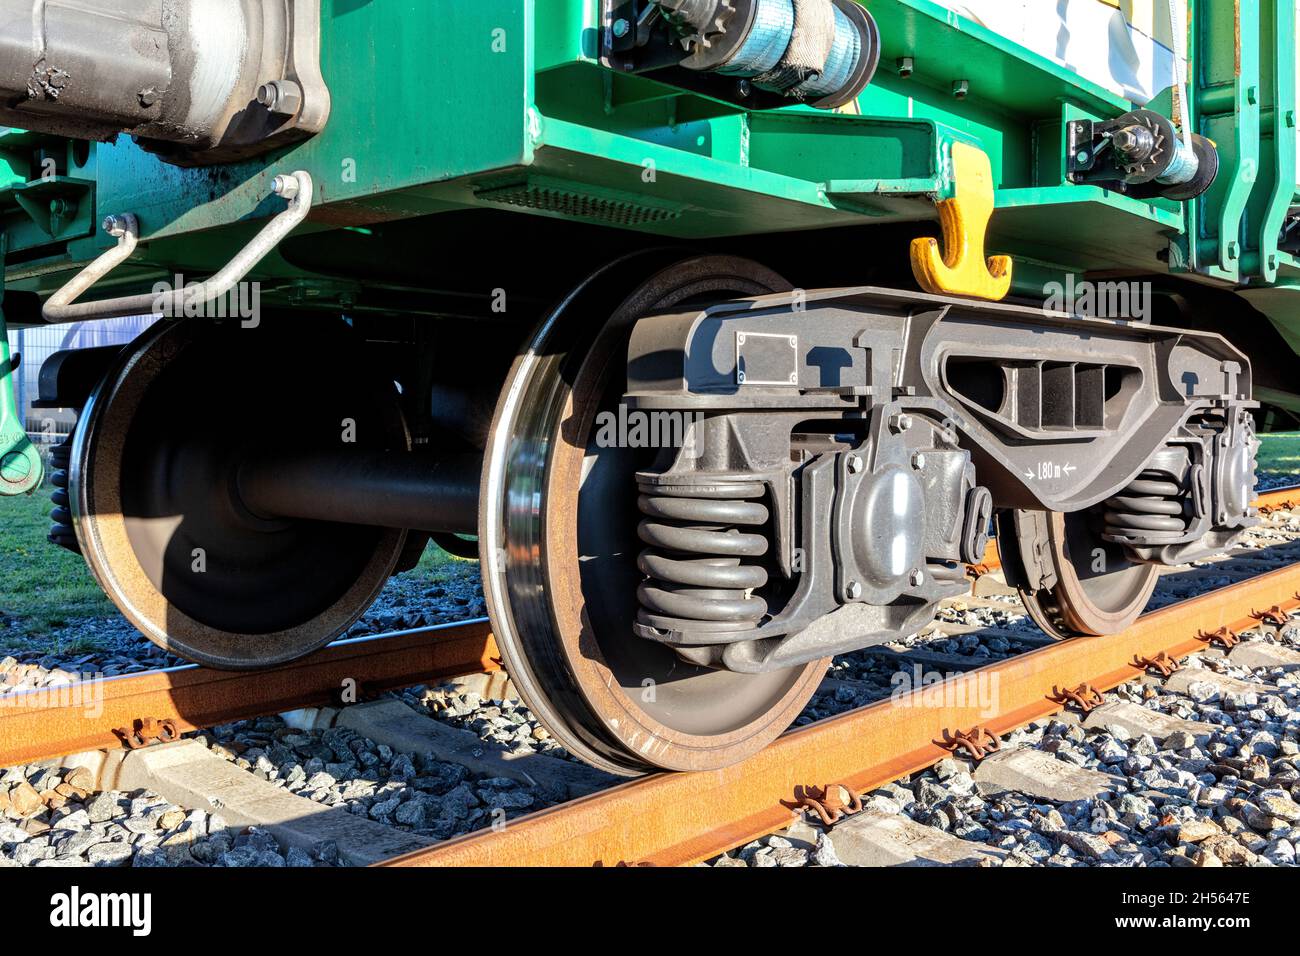 bogie of a freight car on railway track Stock Photo